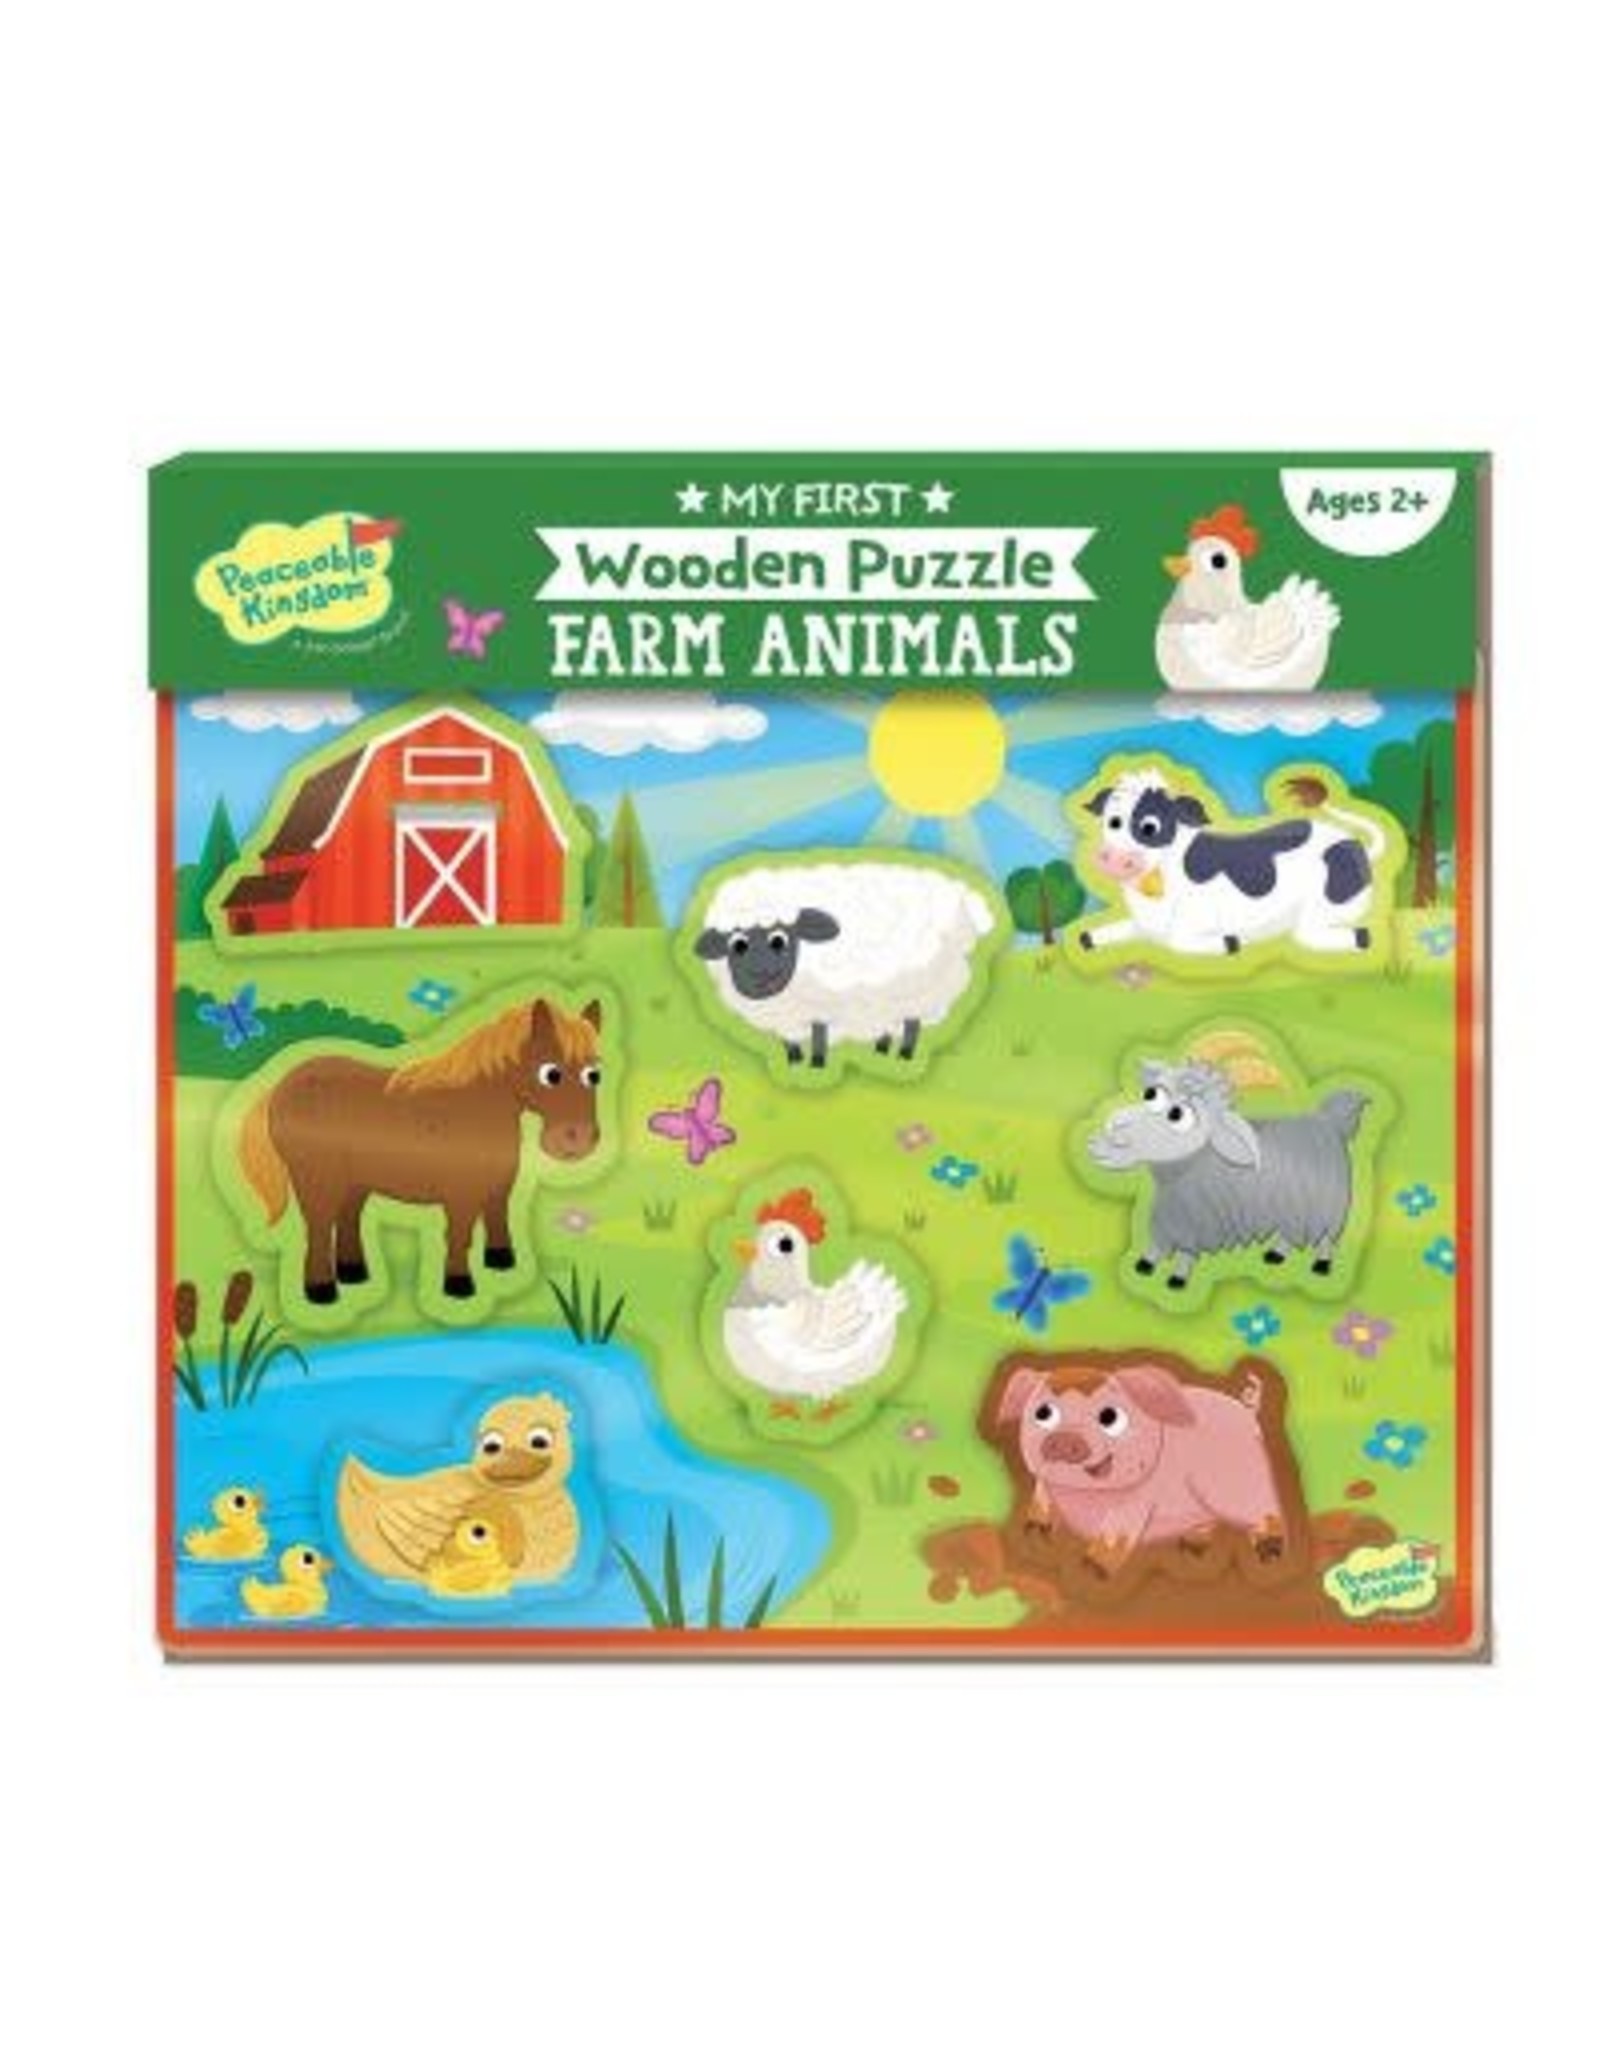 My First Wooden Puzzle: Farm Animals